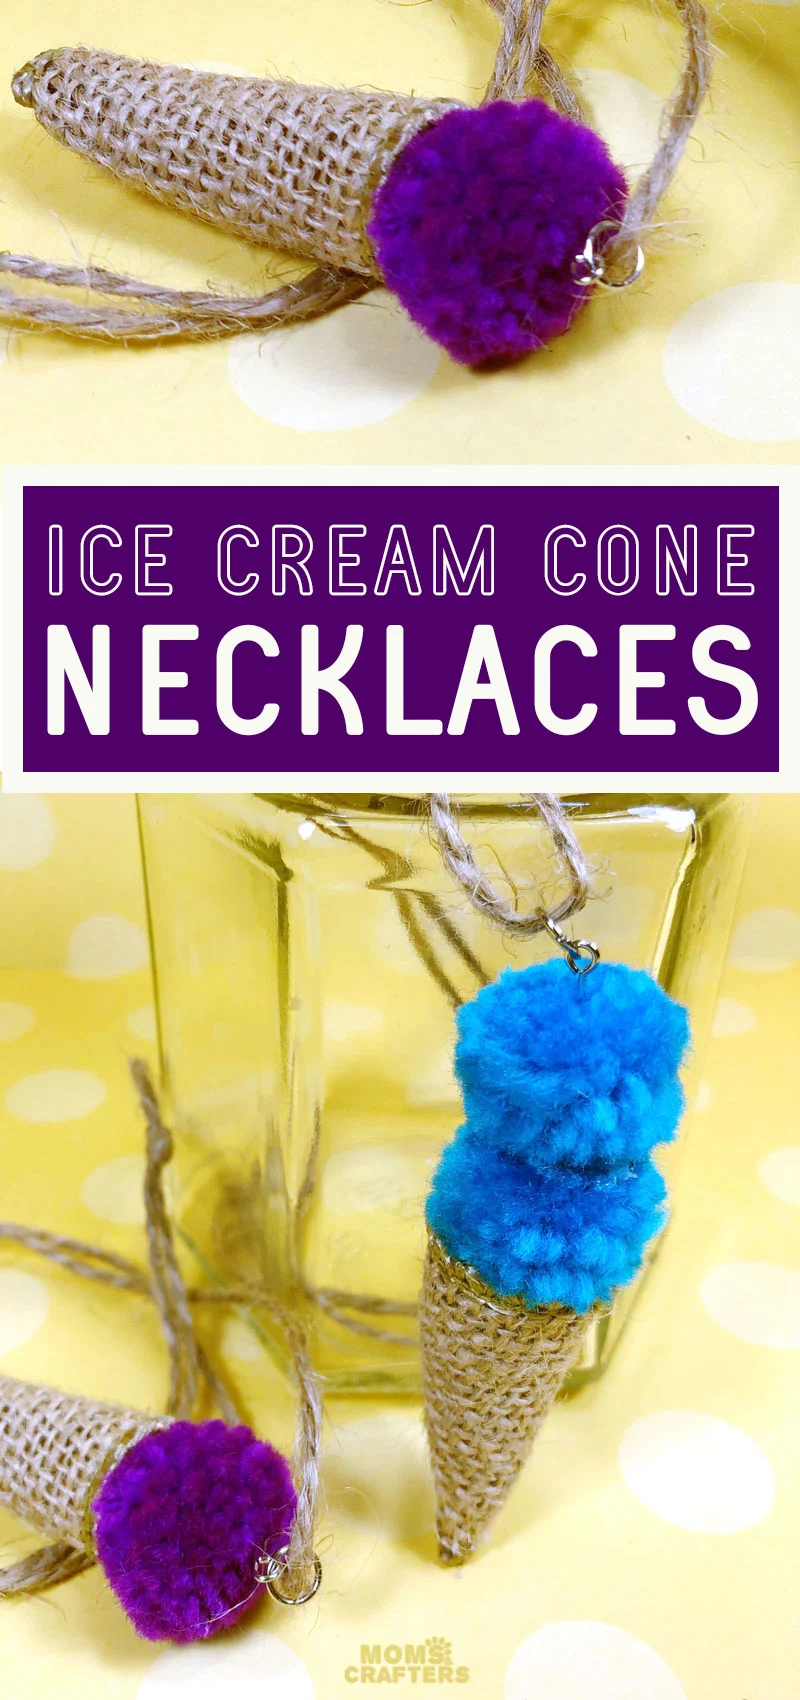 Craft an ice cream necklace using some burlap and a pom pom! This fun summer craft for kids and tweens is adorable and an easy jewelry making idea for kids.